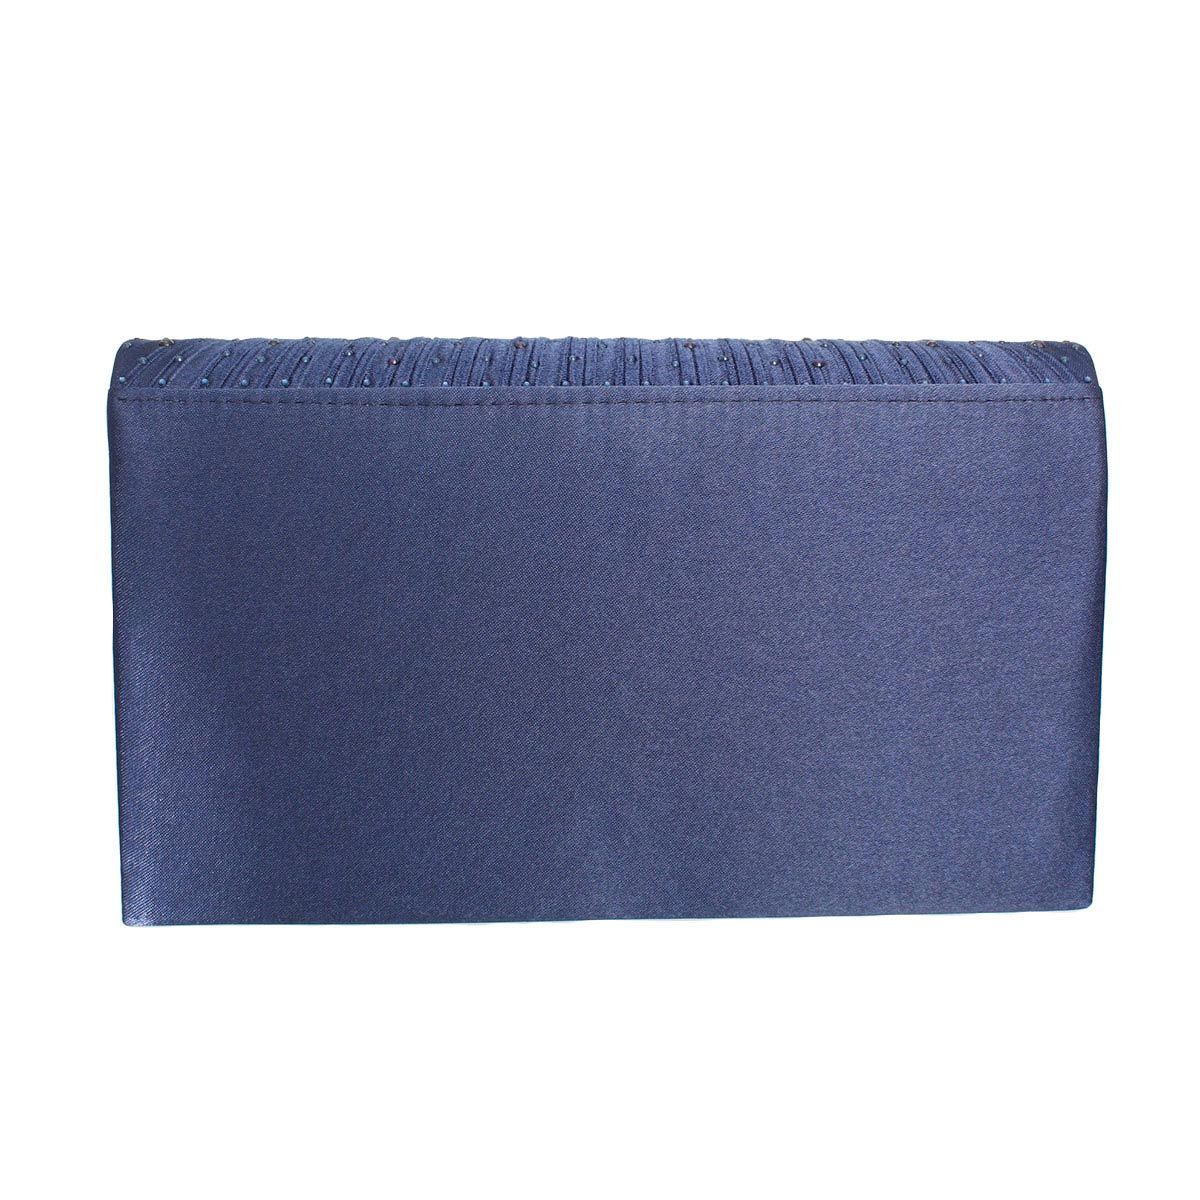 Clutch Navy Ruched Bag for Women